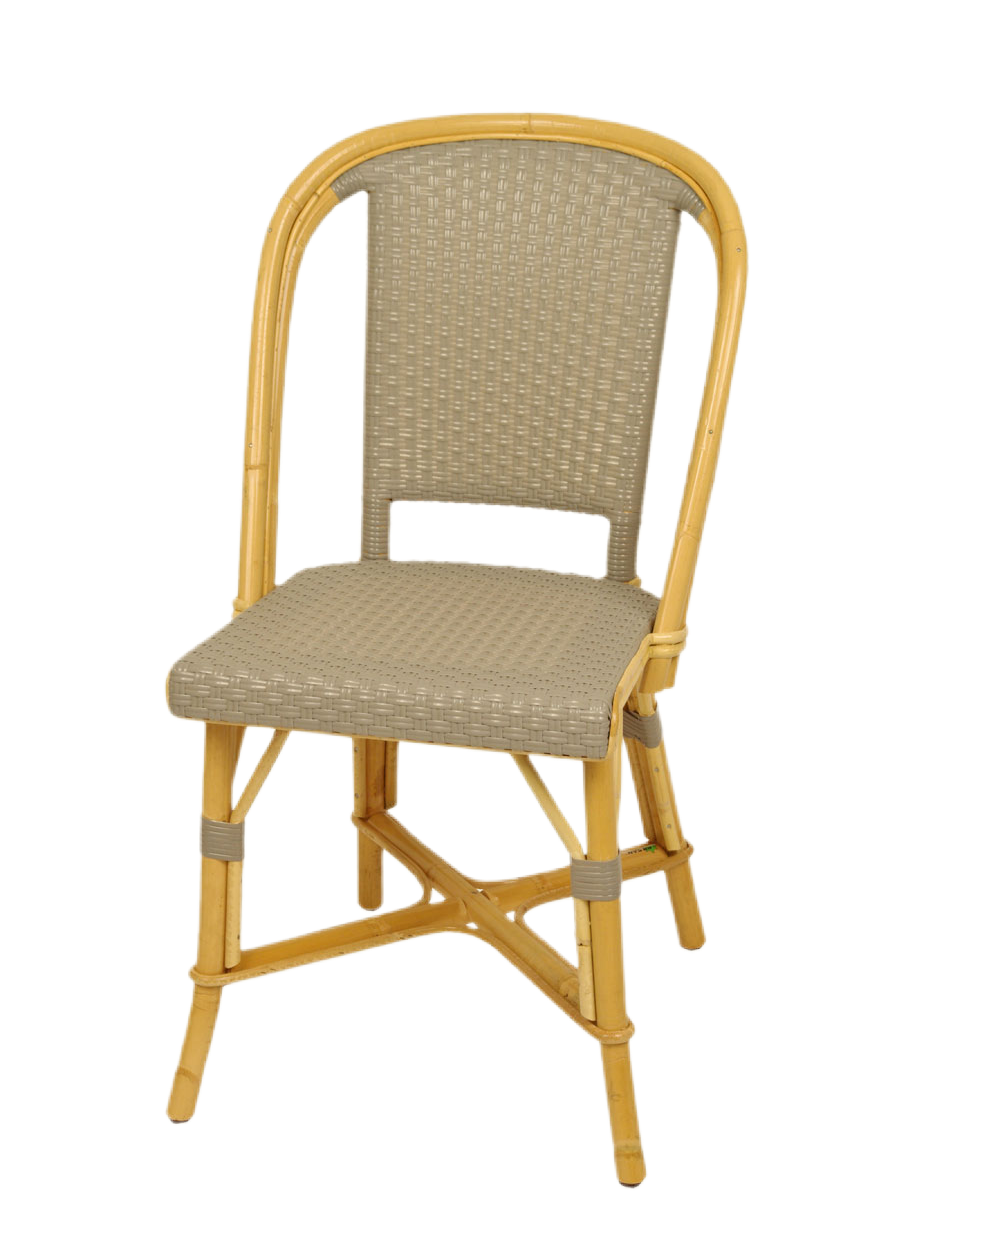 Woven Rattan Fouquet Bistro Chair Satin Taupe– French inc